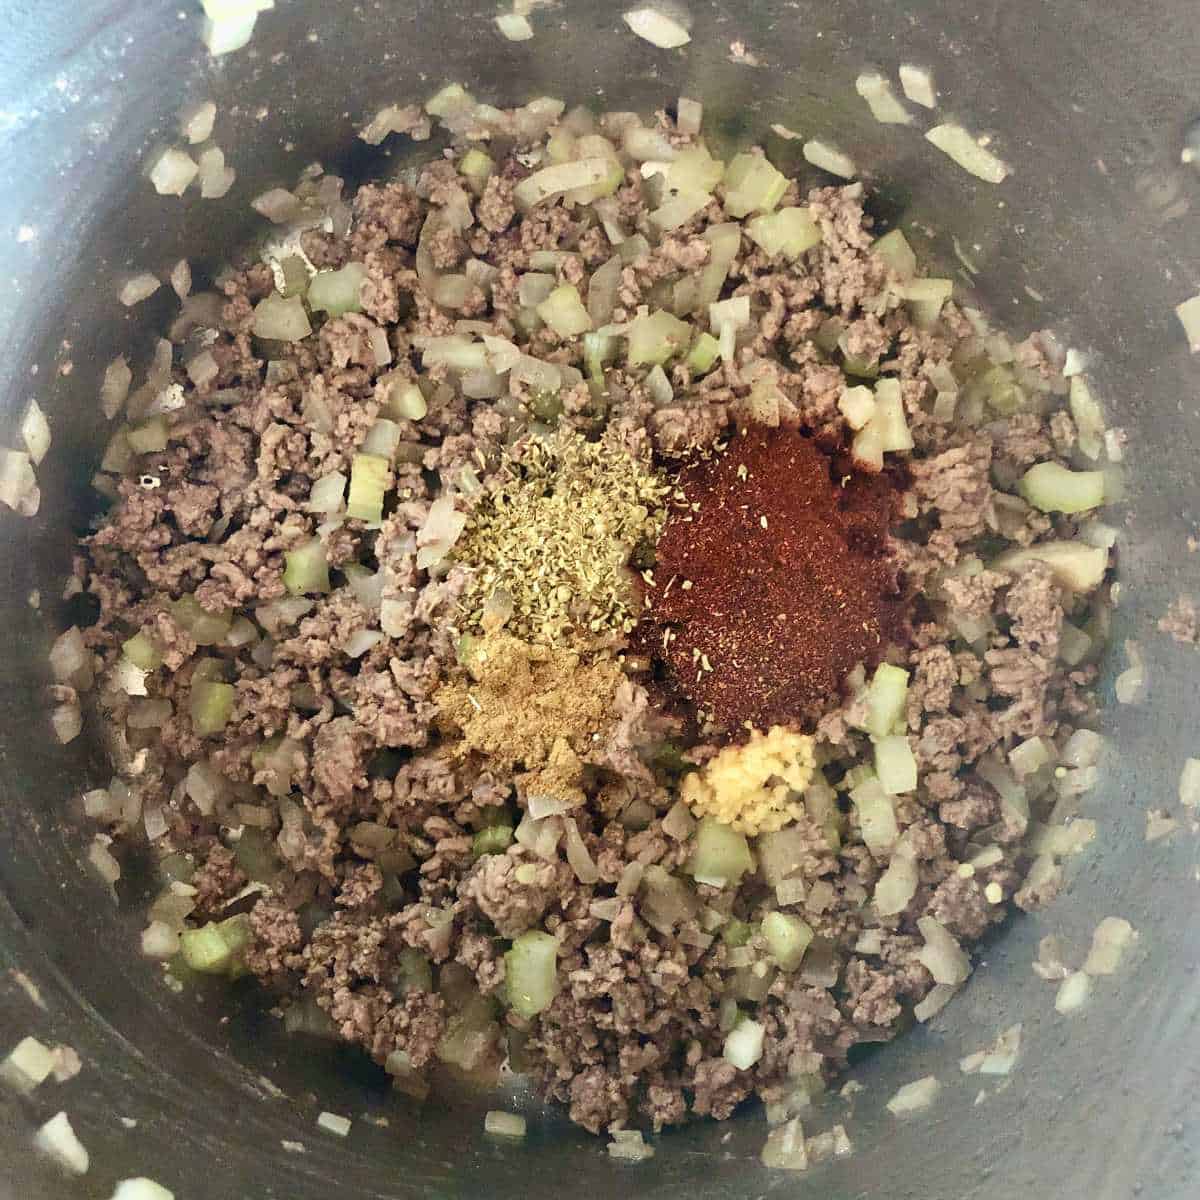 Spices added to ground beef for gluten free chili